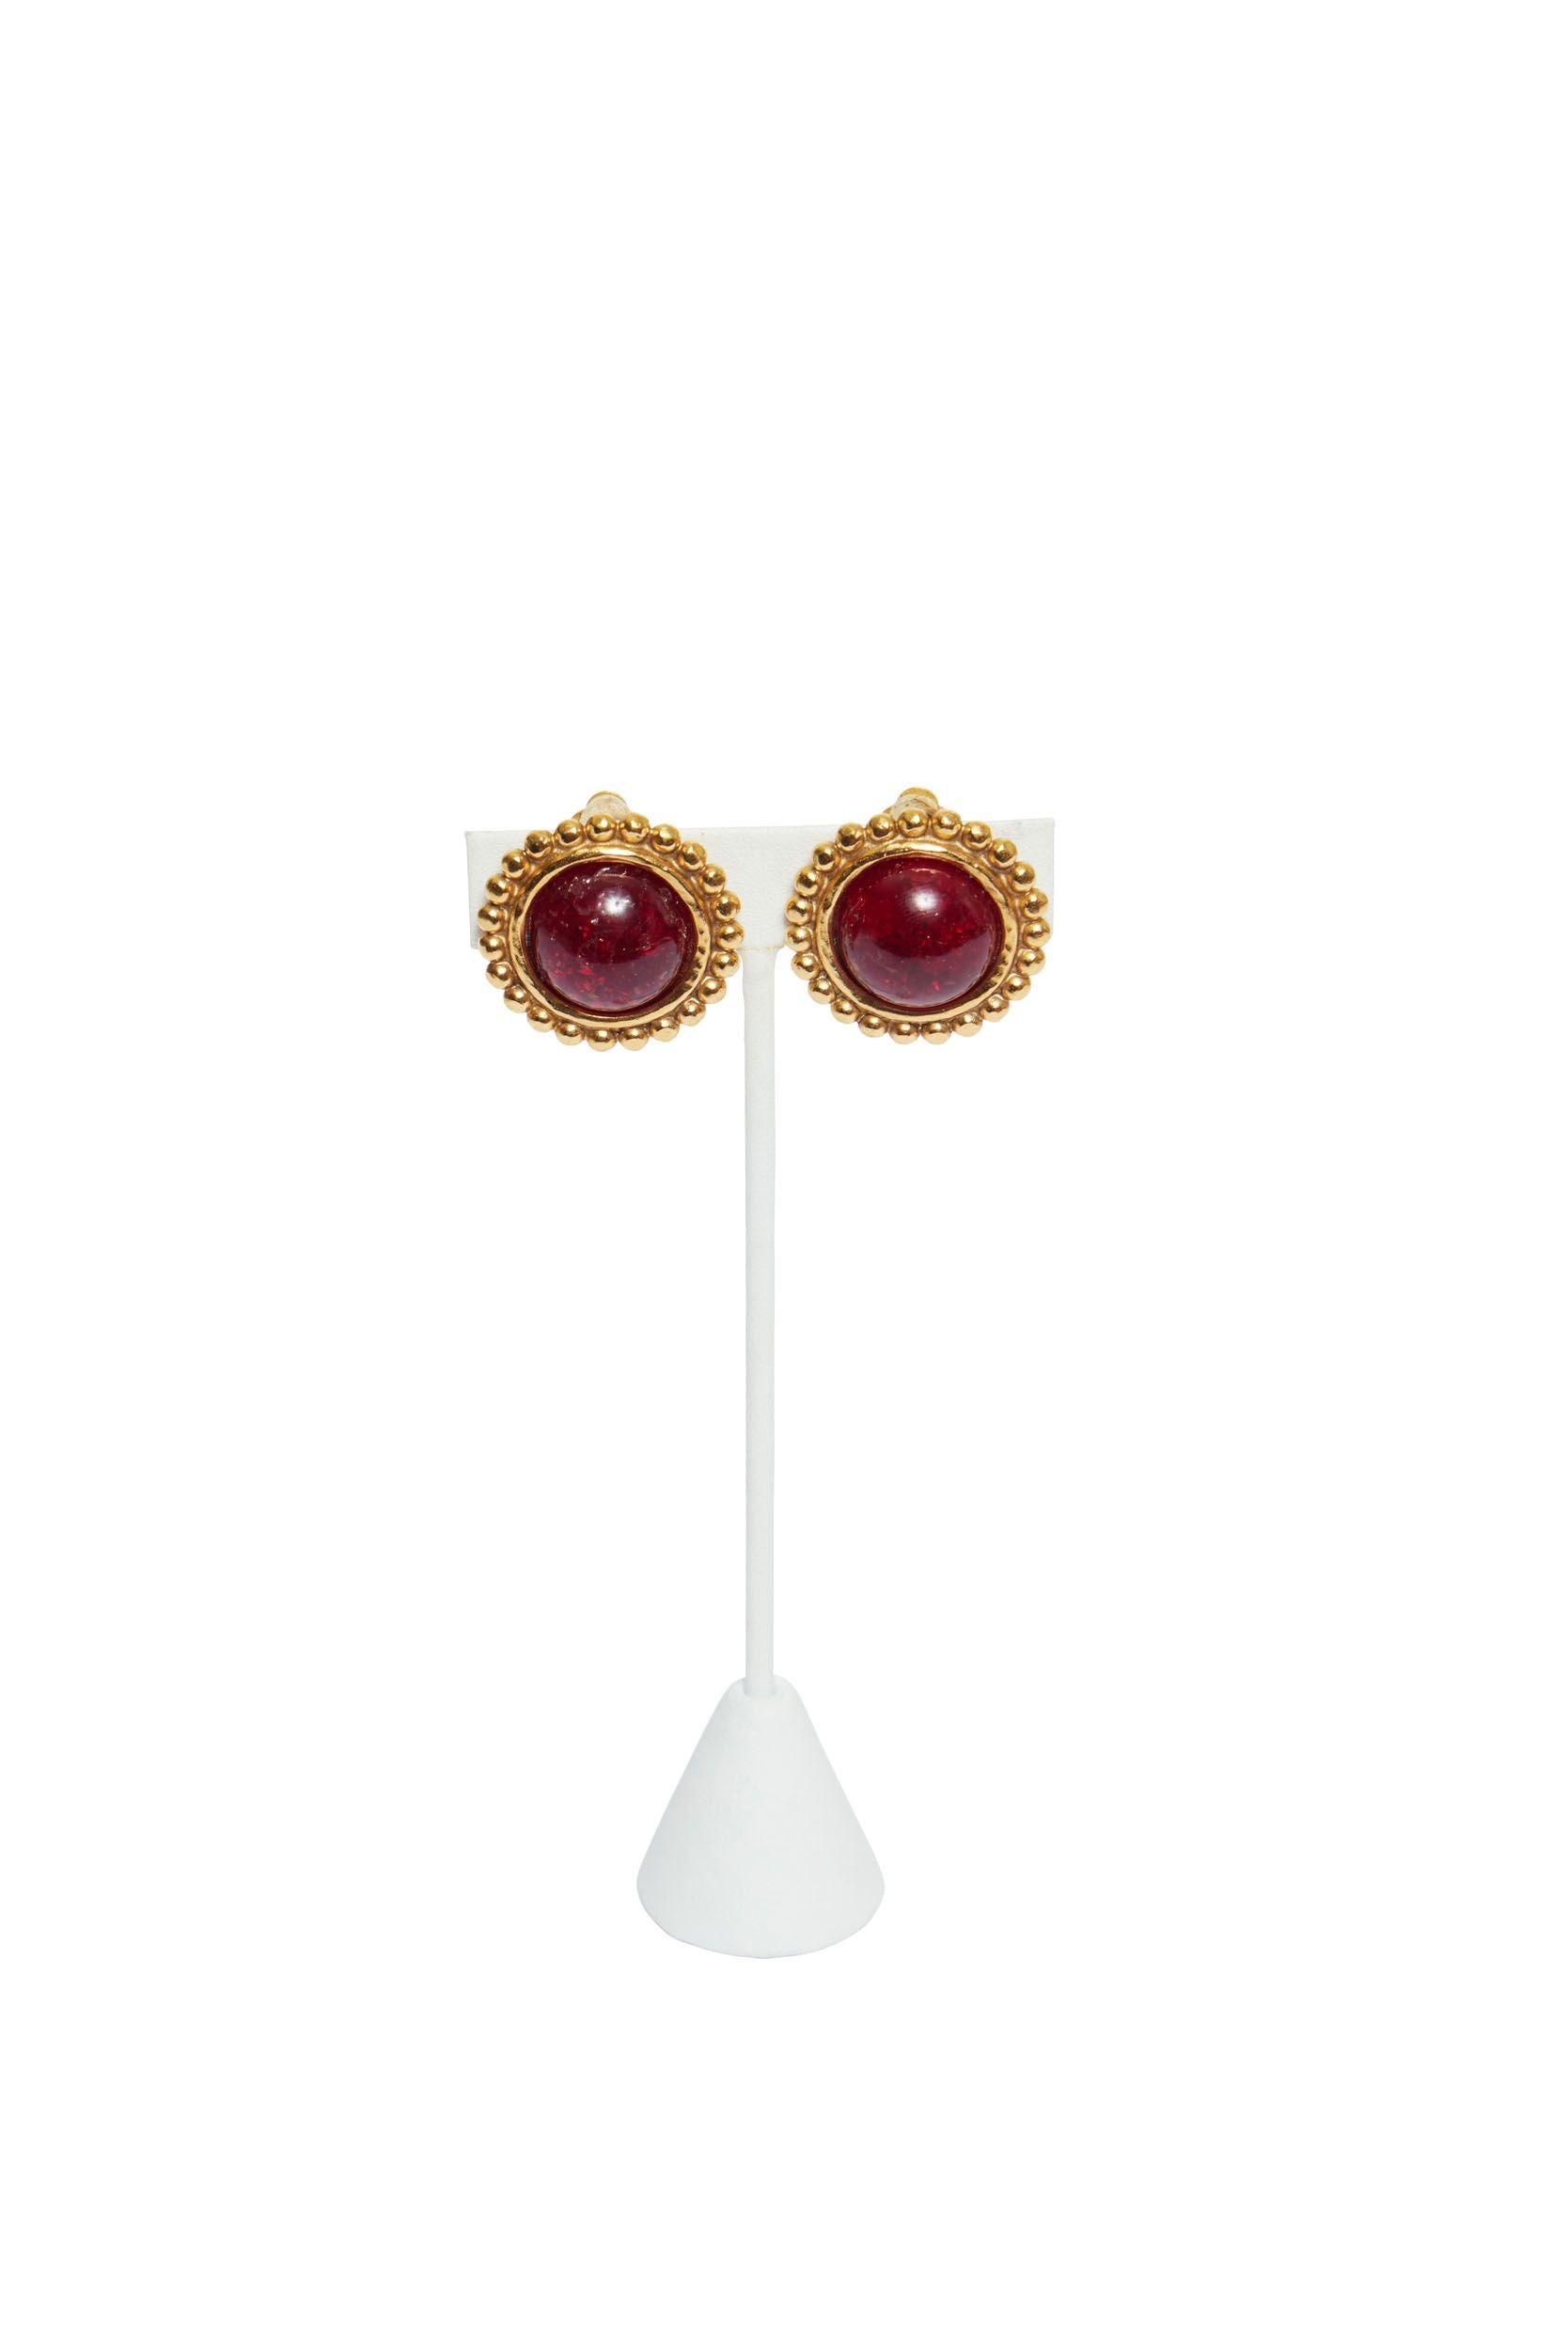 Chanel Gold Plated/Red Gripoix Earrings - Vintage Lux